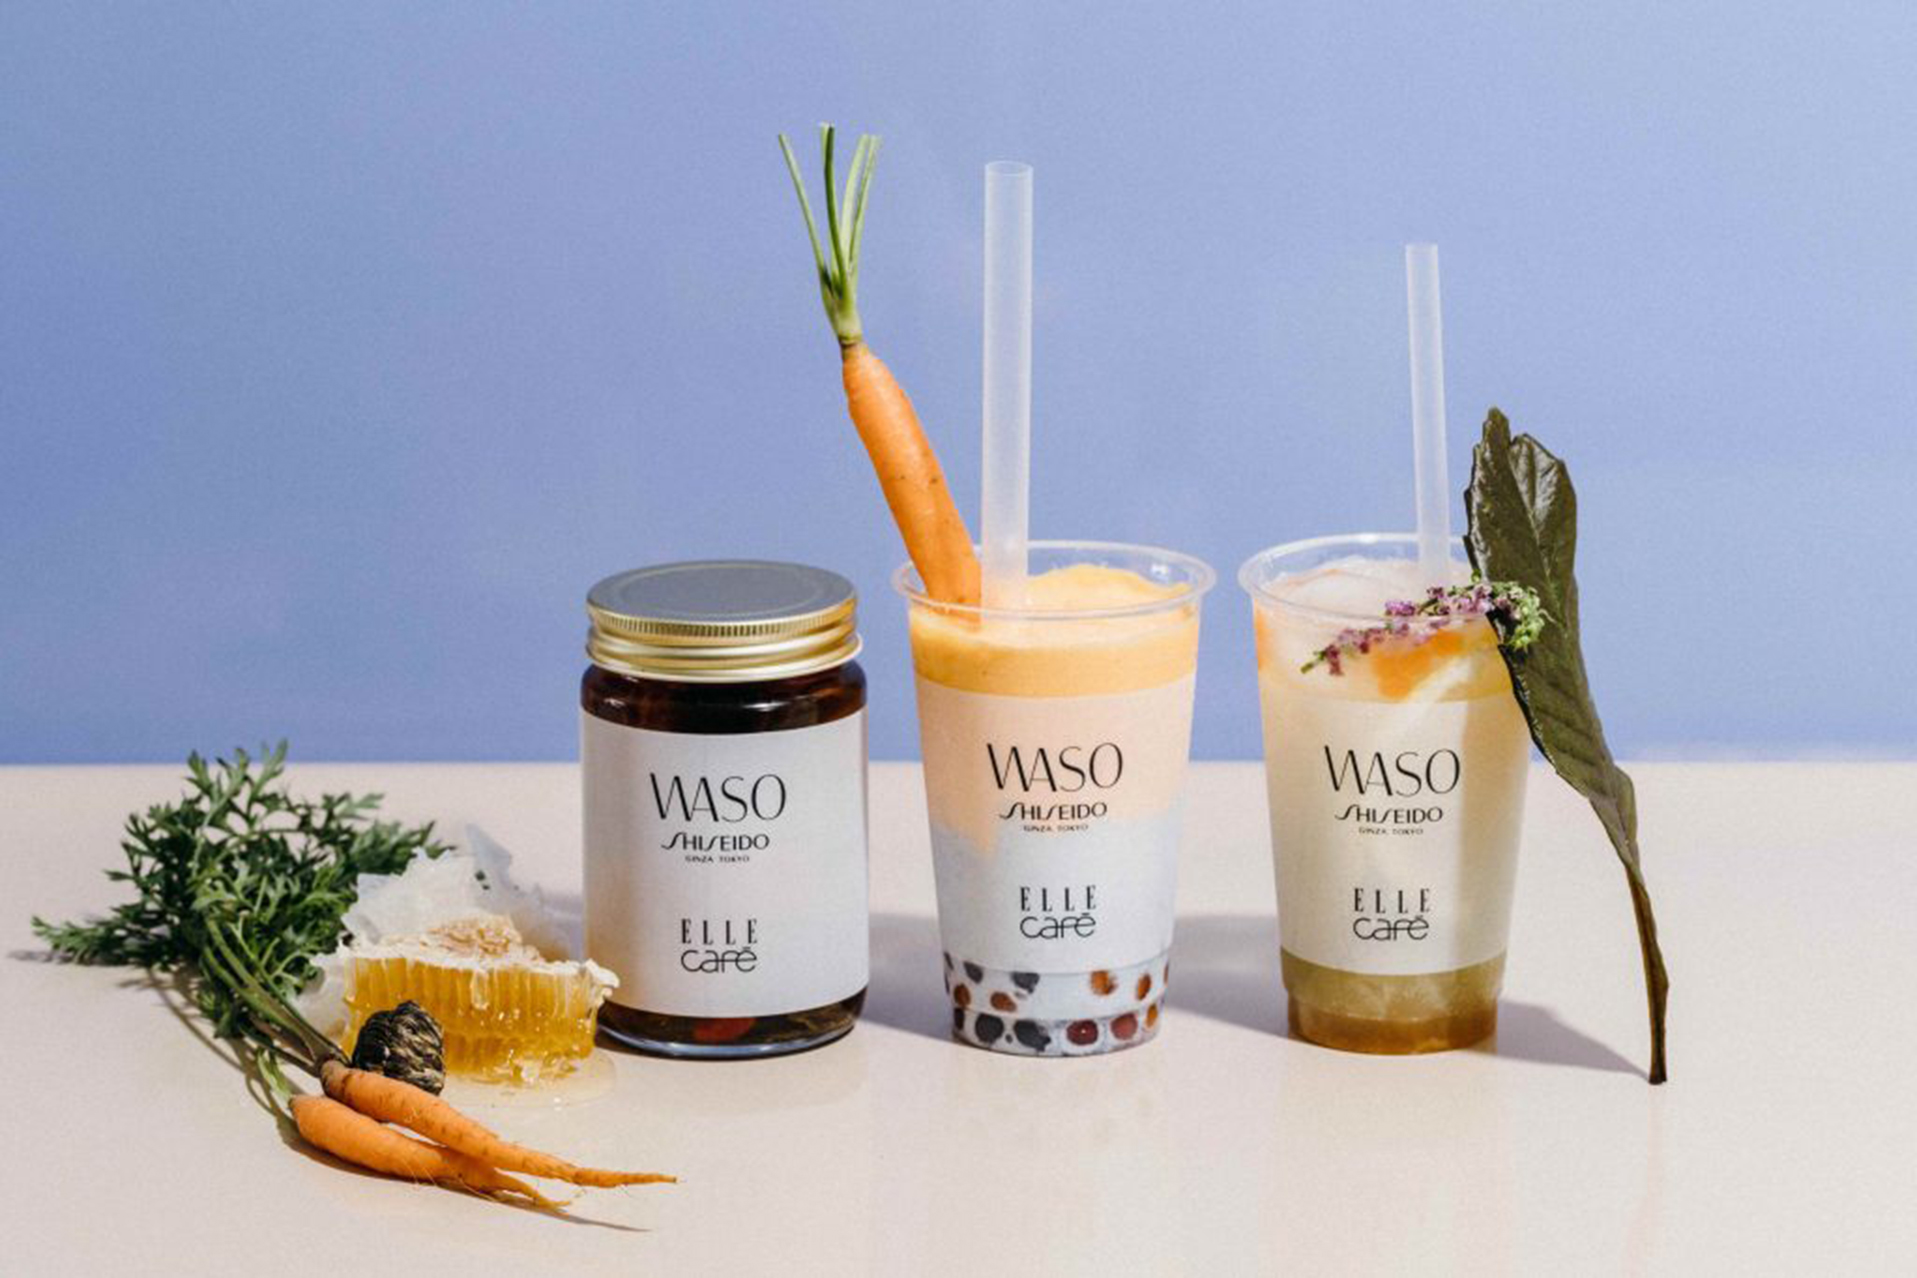 ELLE café NEWS　SHISEIDO new skincare line collaborated with “WASO”